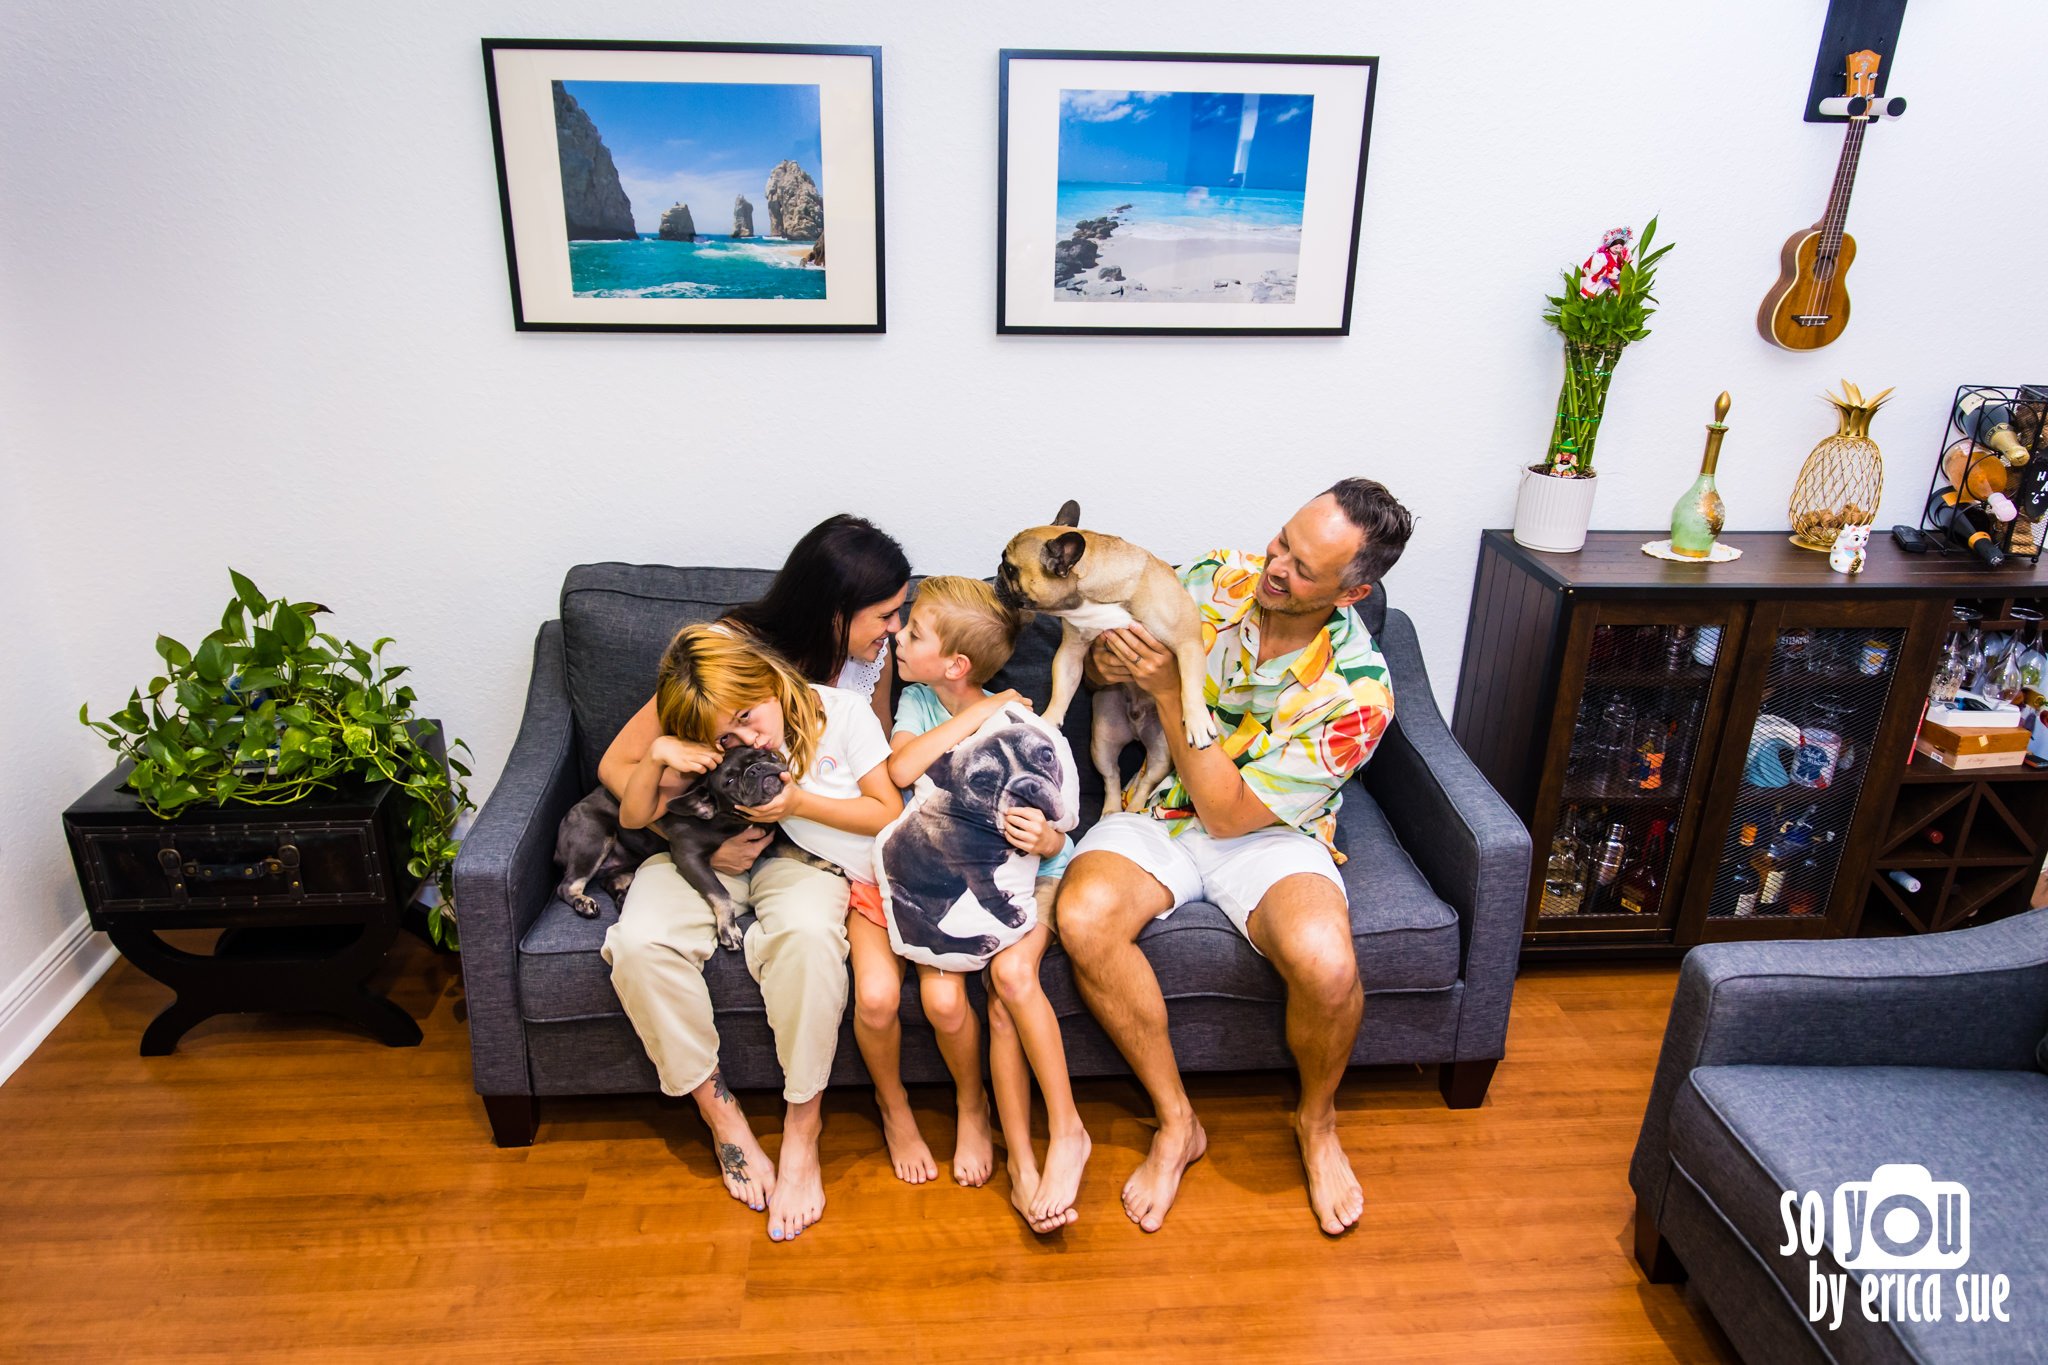 17-jury-fam-at-home-lifestyle-family-photographer-miami-fl-so-you-by-erica-sue-ES2_8622.jpg